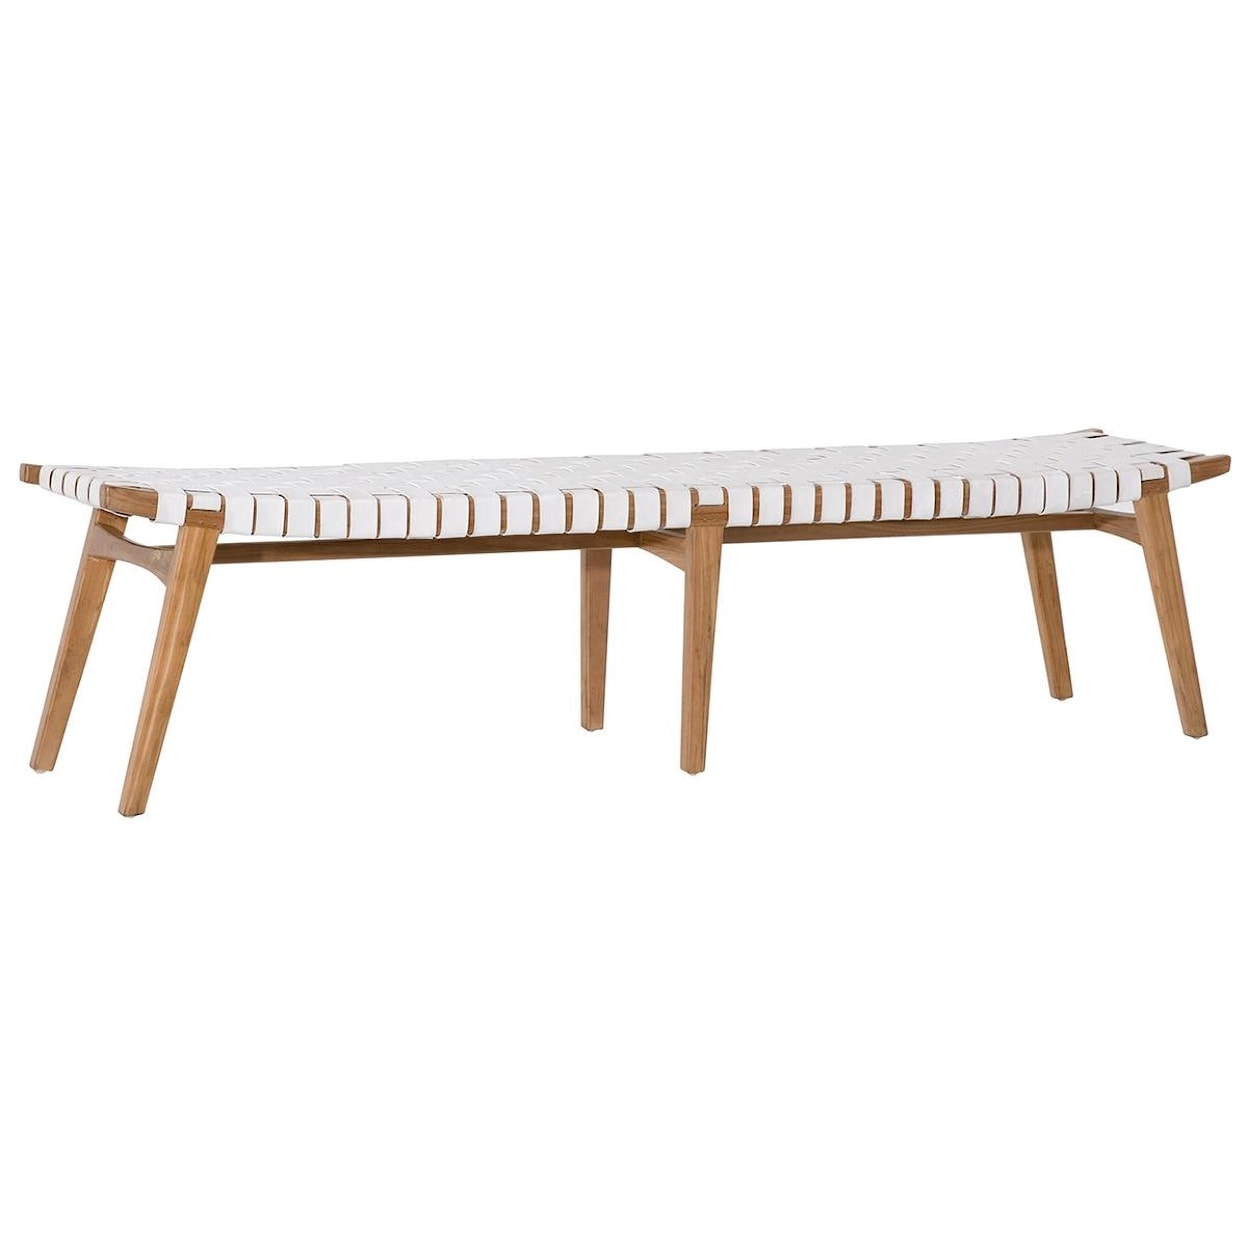 Dovetail Furniture Benches Camila Bench